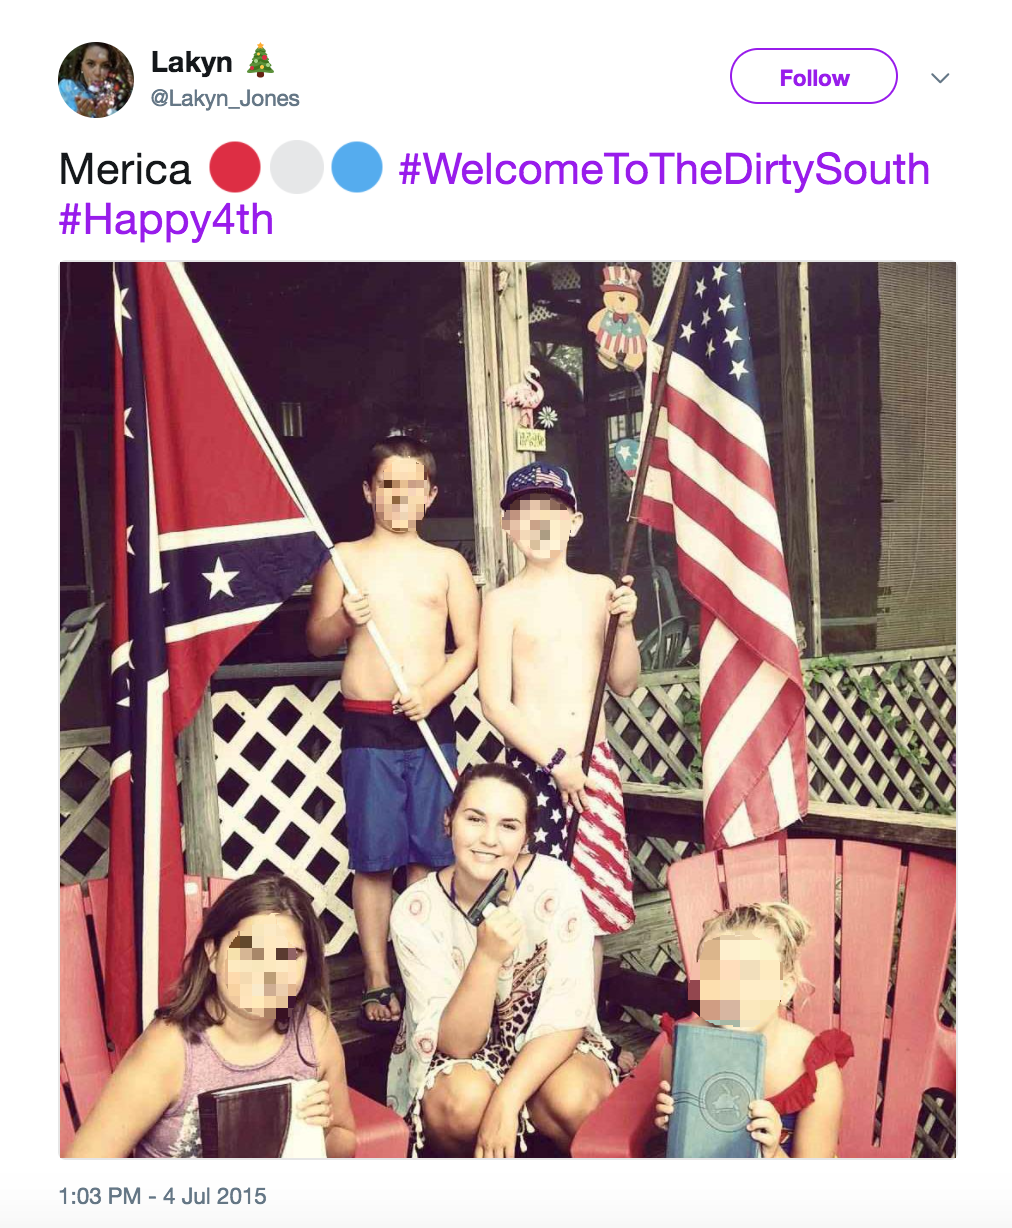 This tweet from Keaton Jones's sister shows members of the Jones family posing with a Confederate flag